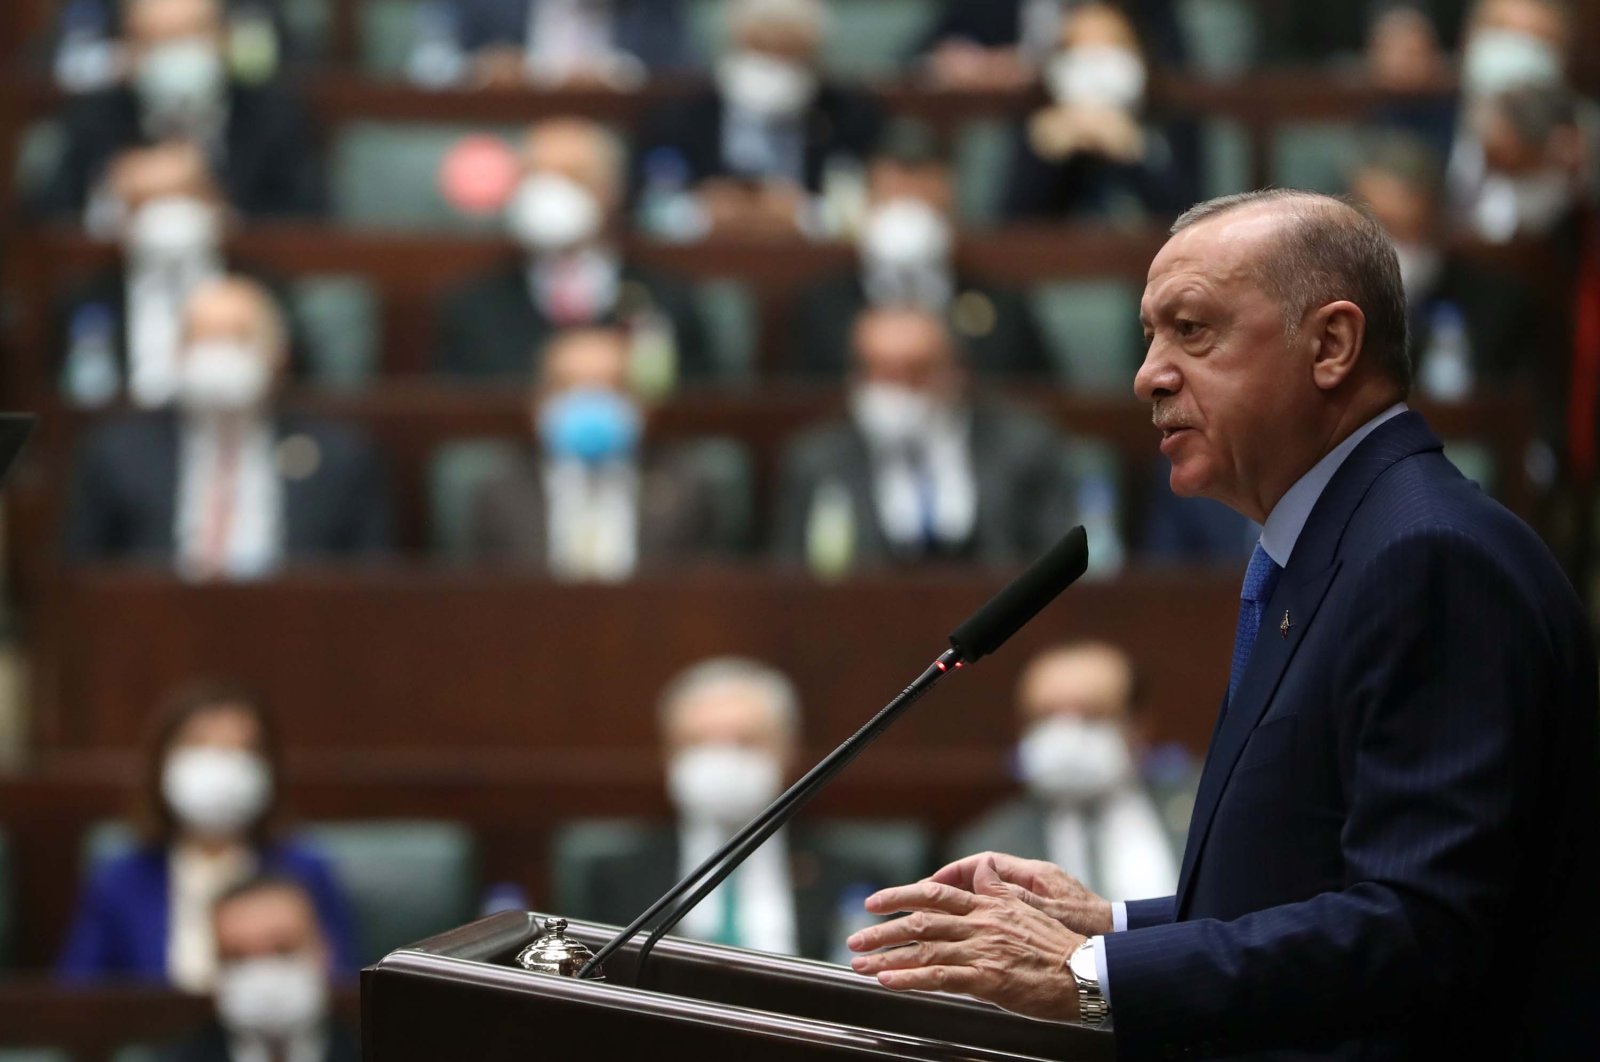 The ruling Justice and Development Party&#039;s (AK Party) chairperson, President Recep Tayyip Erdoğan, addresses his party&#039;s lawmakers at a group parliamentary meeting, in the capital Ankara, Turkey, Dec. 22, 2021. (DHA Photo)